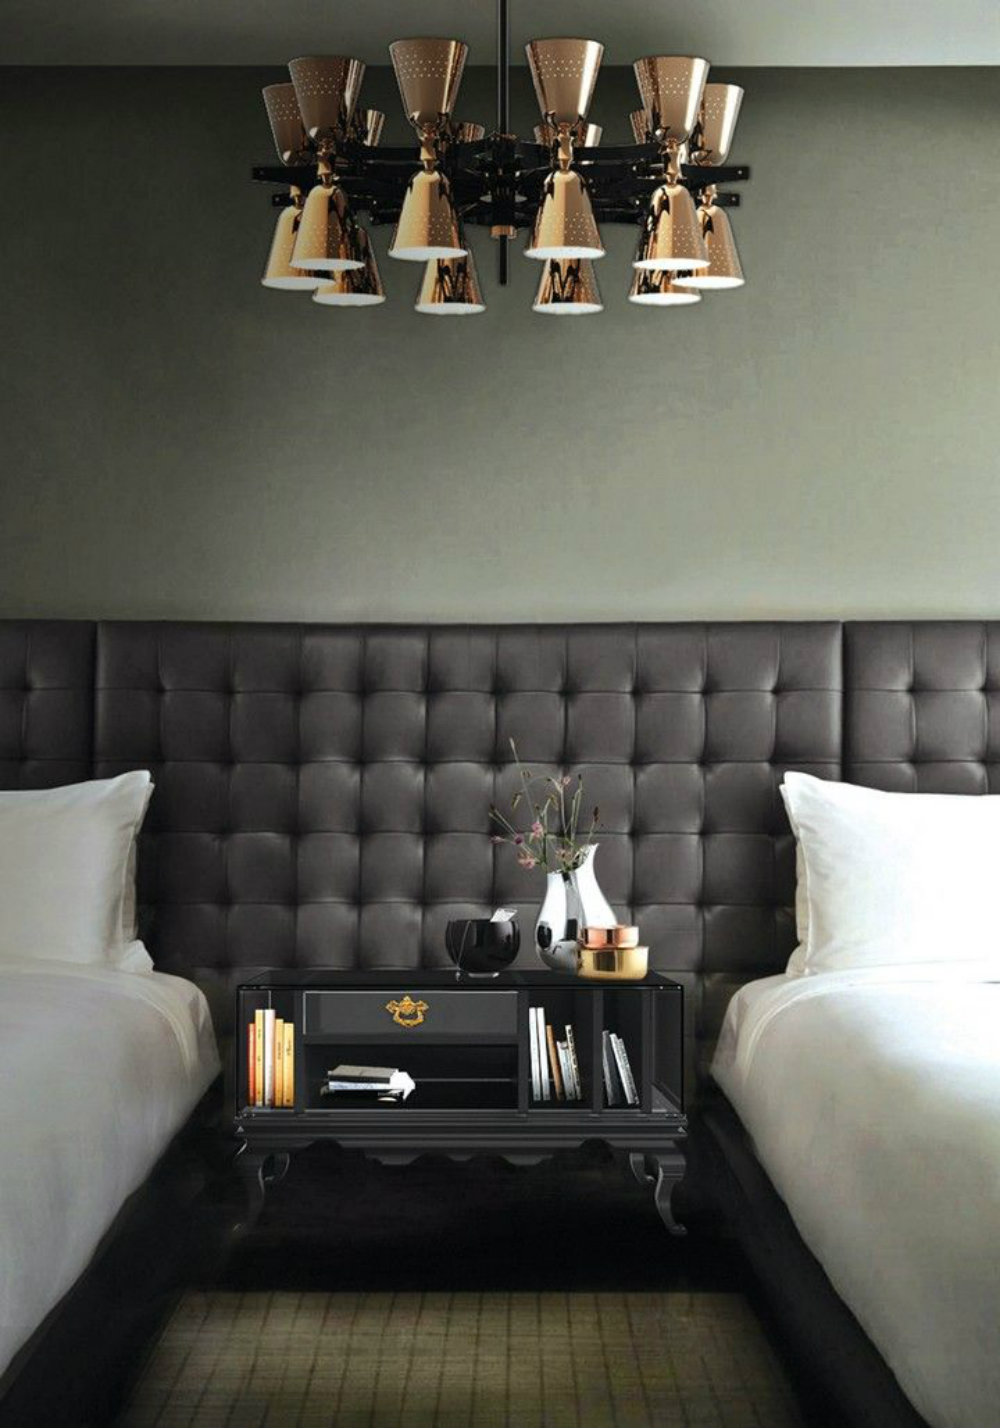 5 Incredible Ideas To Light Up Your Bedroom